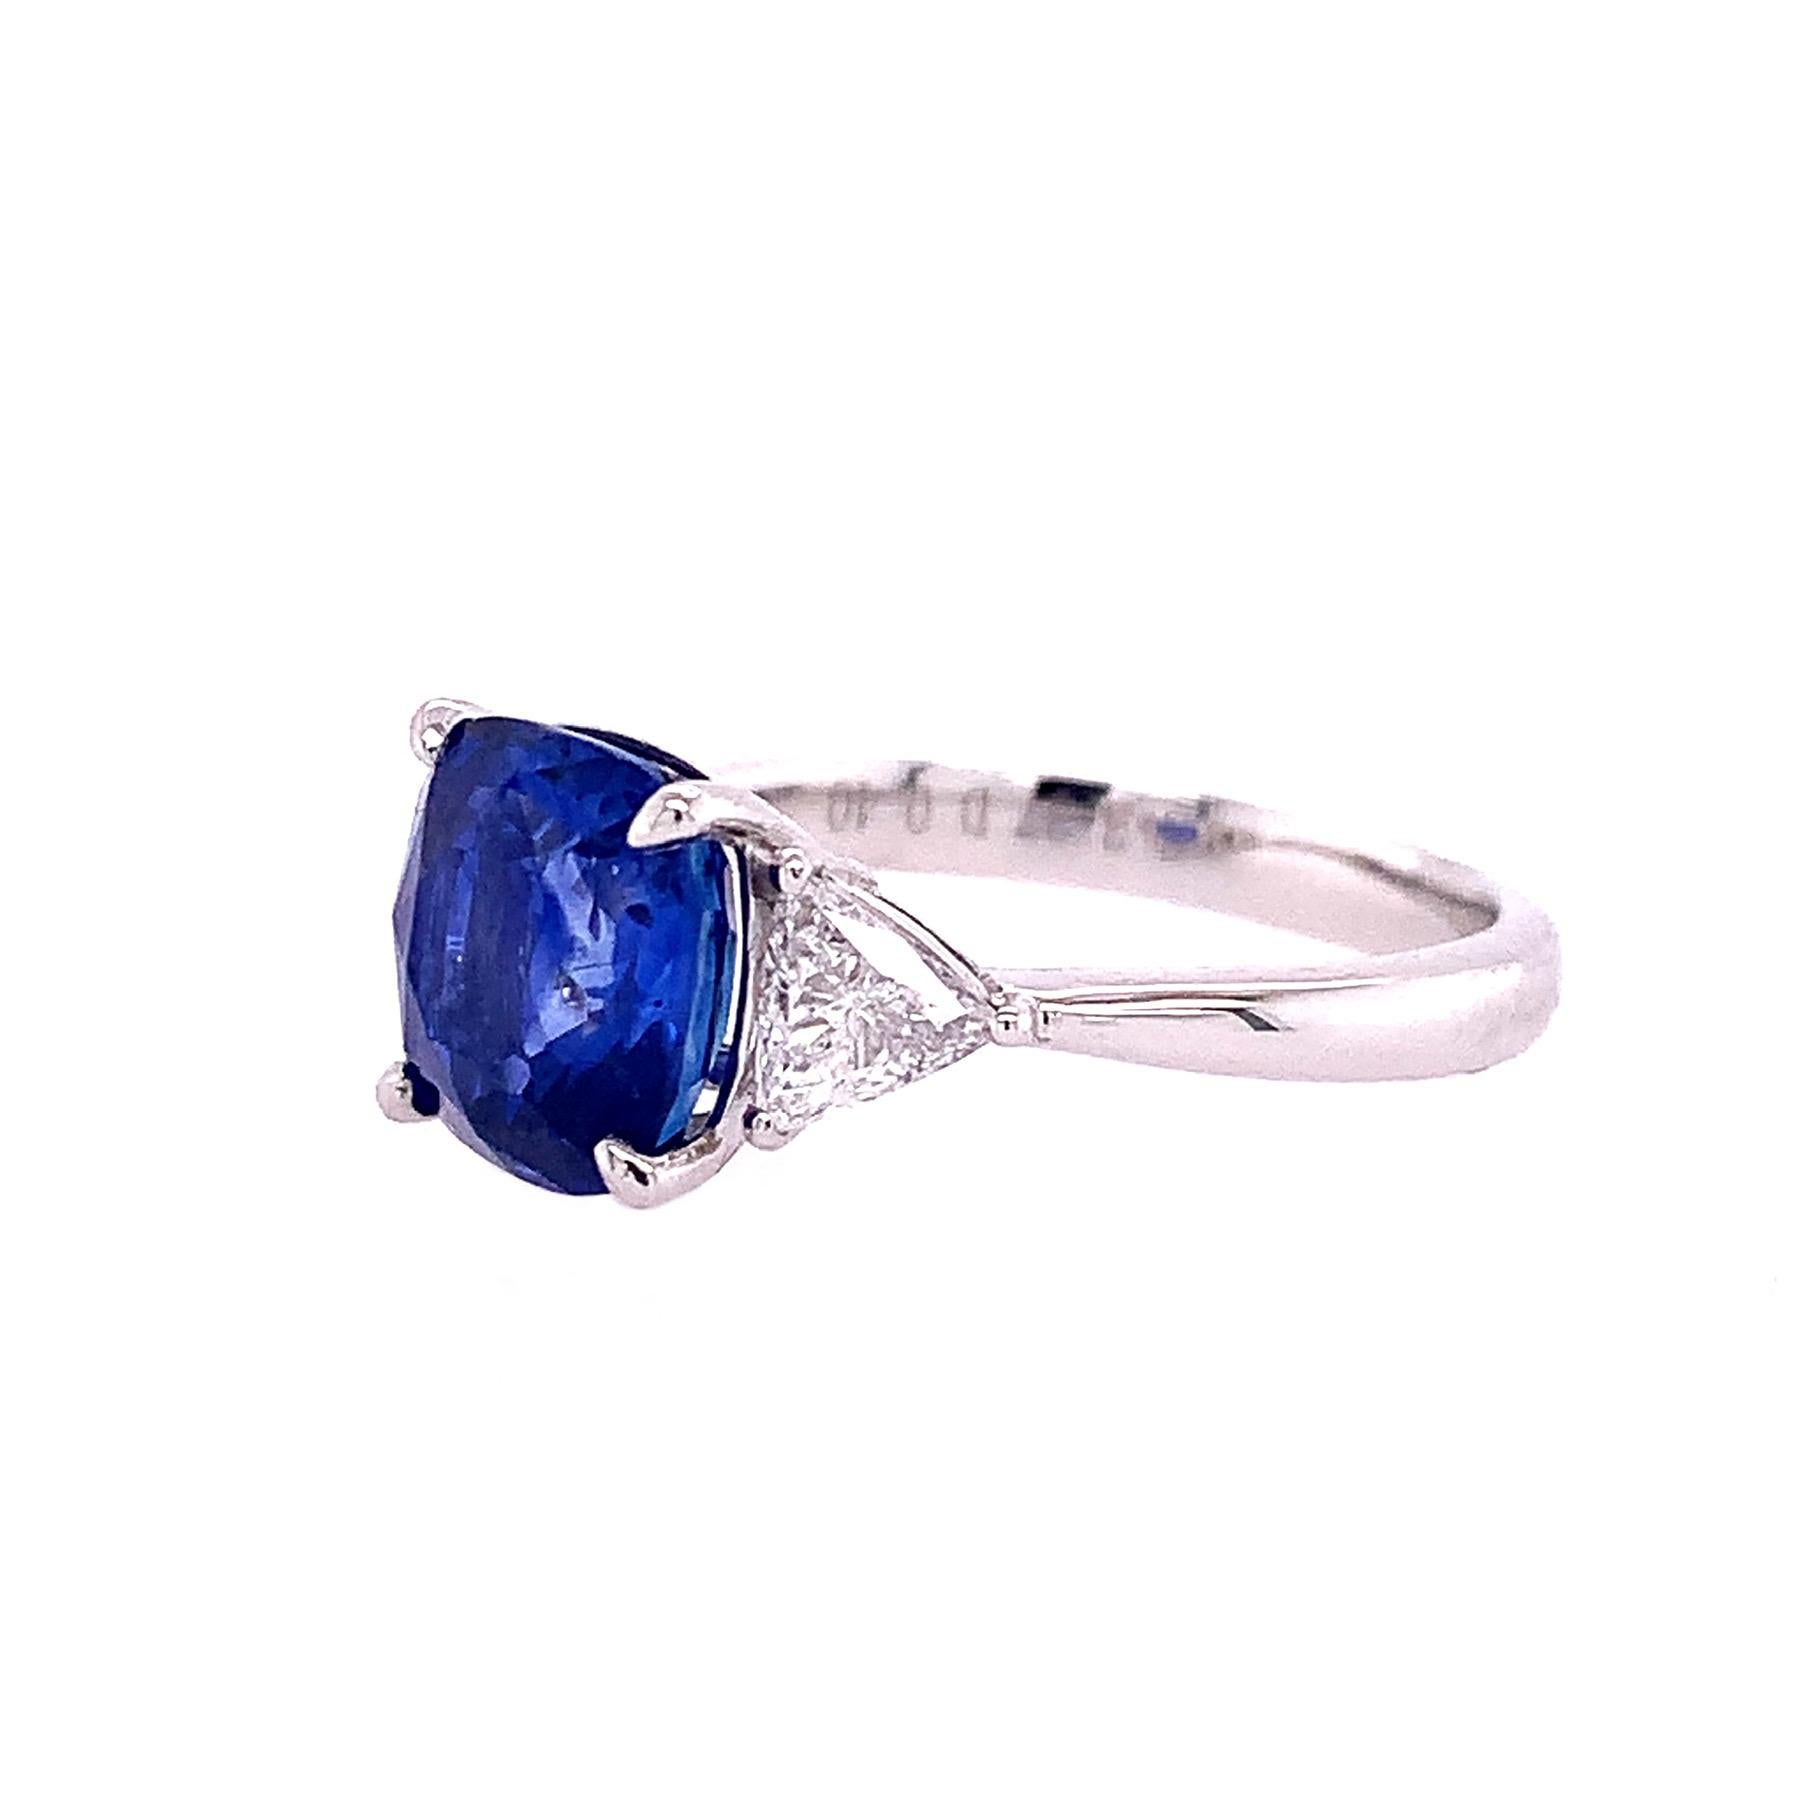 Cushion blue Sapphire center stone with triangle shape diamonds ring set in Platinum. 

Ring size: 6.5U.S.
Blue Sapphire : 3.37ct total weight.
Diamond : 0.40ct total weight.
All diamonds are G-H/SI stones.
